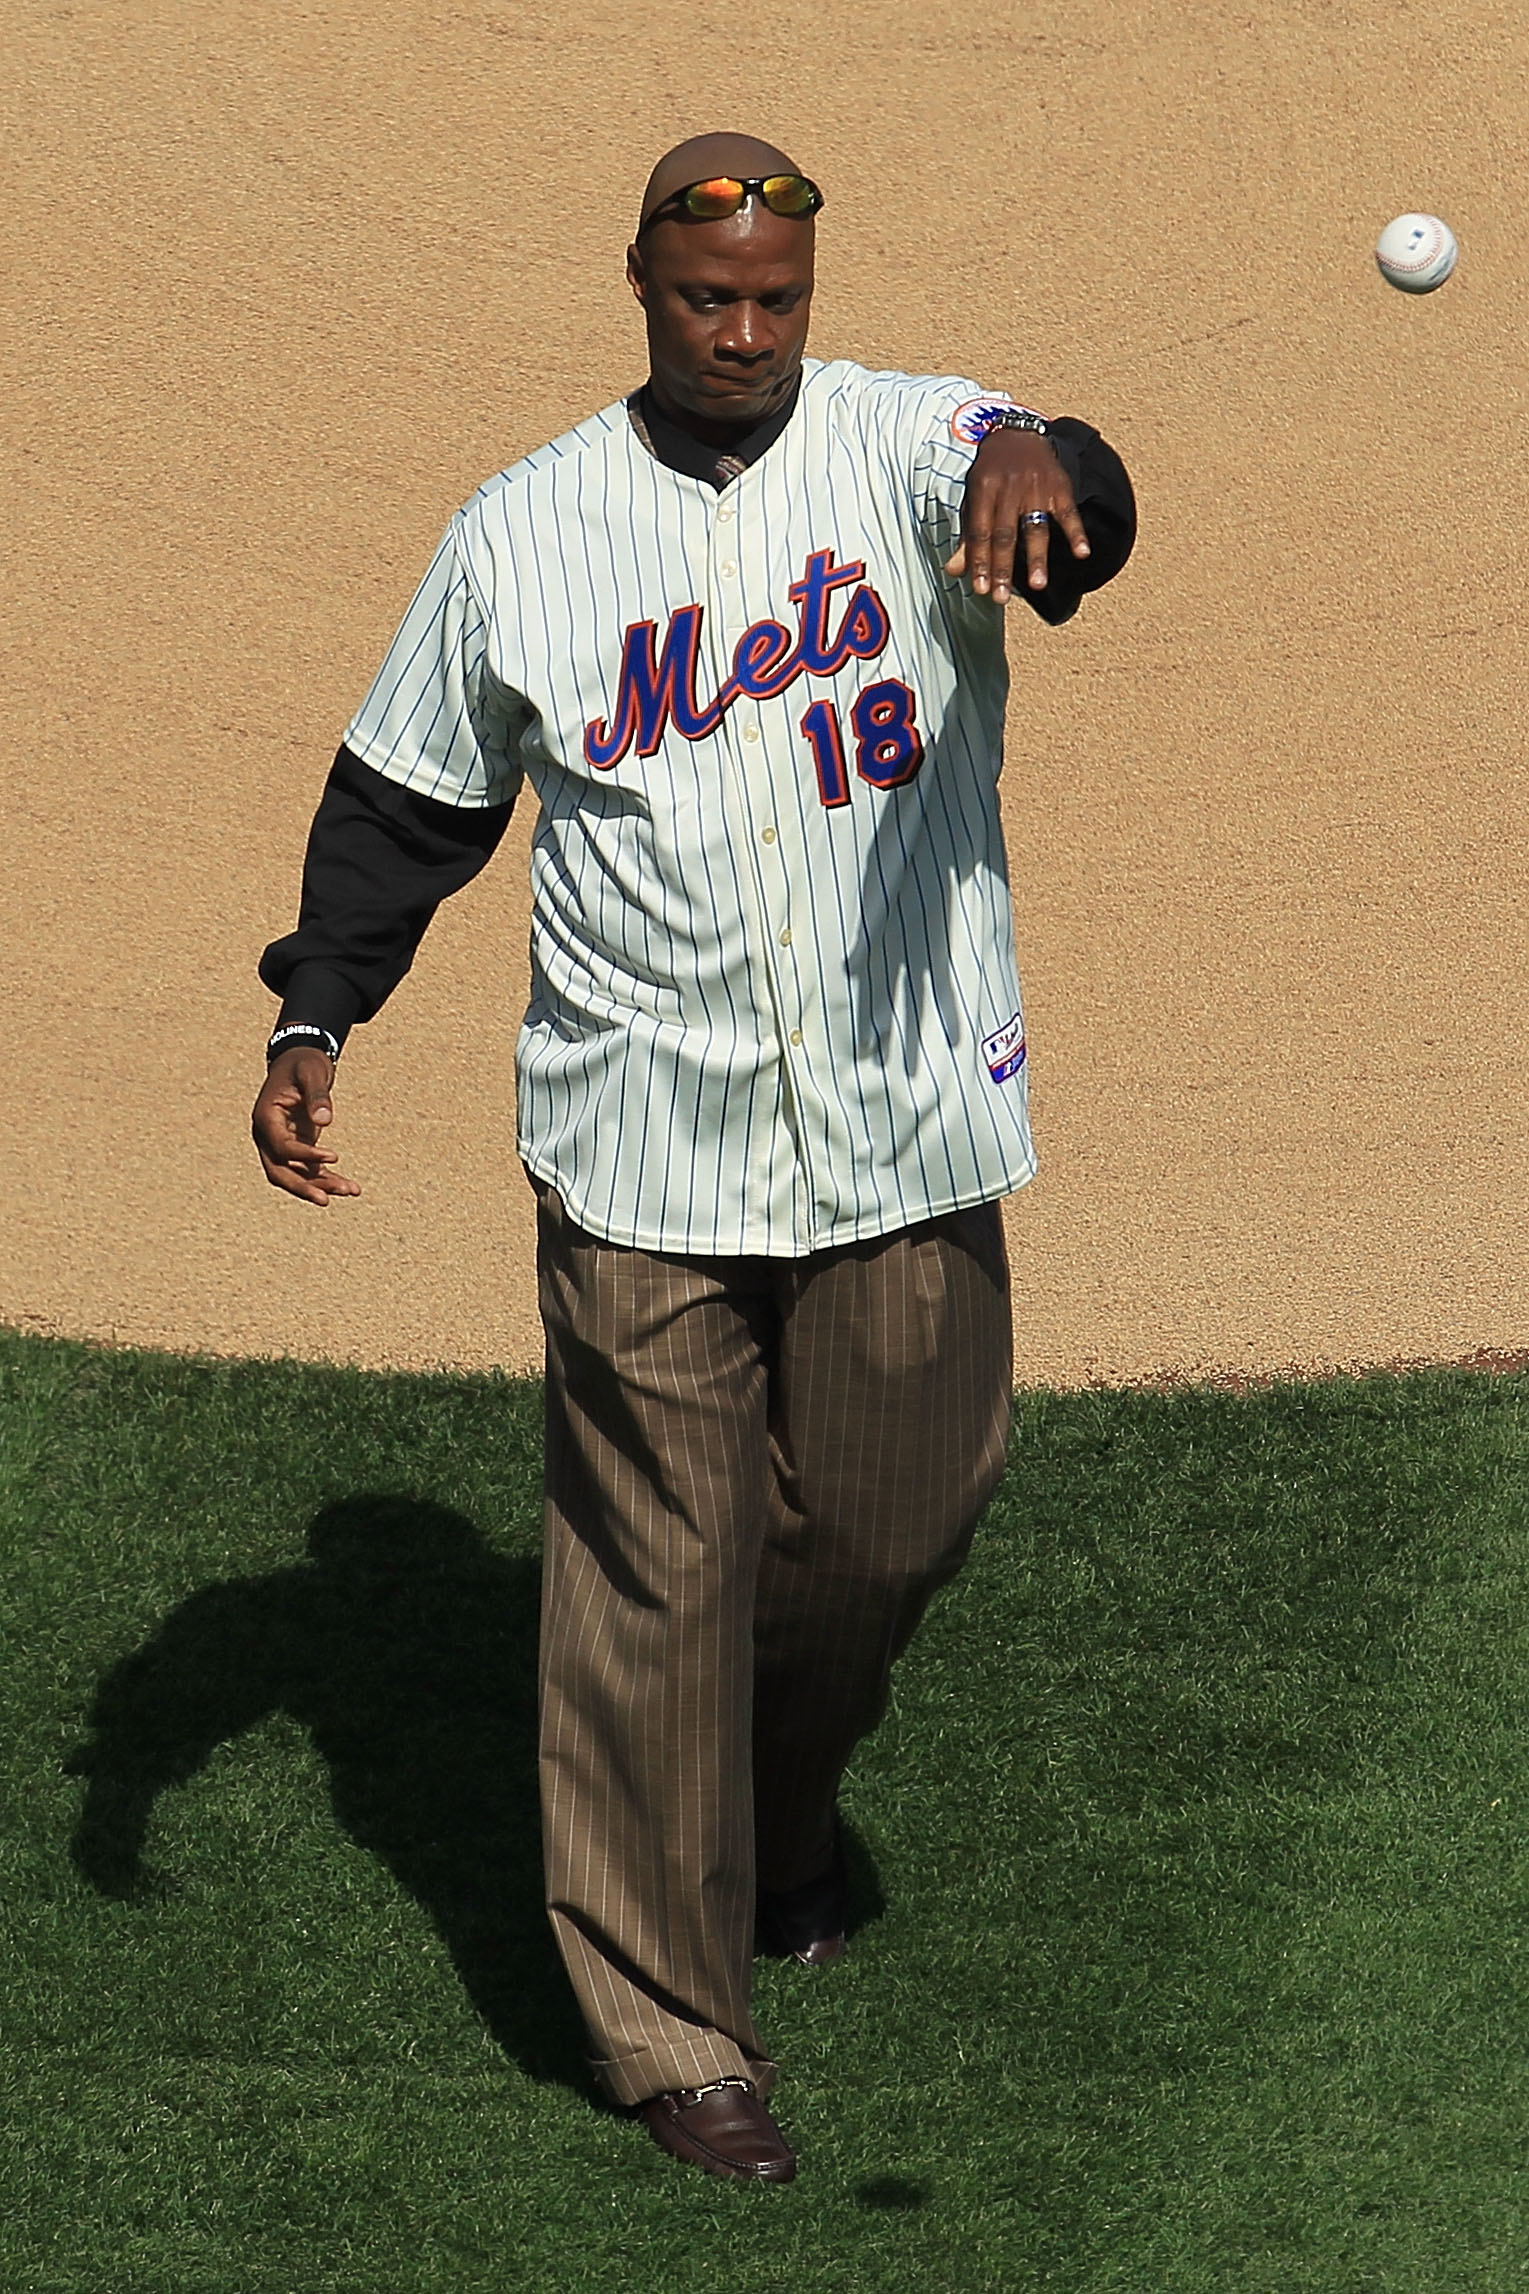 NEW YORK - APRIL 05: Former New York Mets player, Darryl Strawberry throws out the ceremonial first pitch prior to the game between the New York Mets and the Florida Marlins during their Opening Day game at Citi Field on April 5, 2010 in the Flushing neig